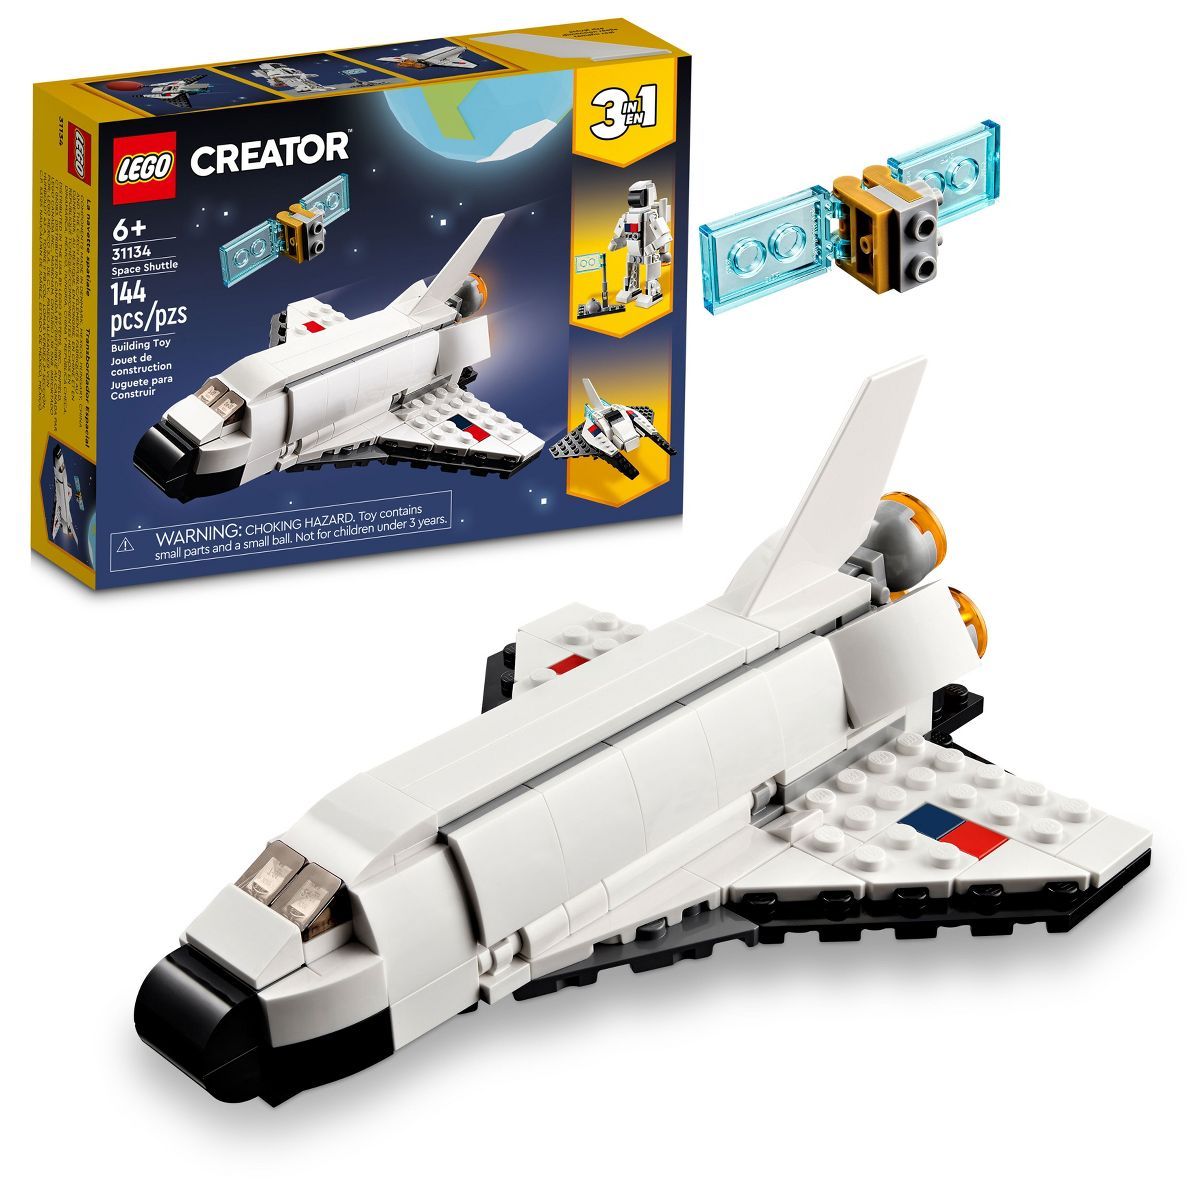 LEGO Creator 3 in 1 Space Shuttle & Spaceship Toys 31134 | Target